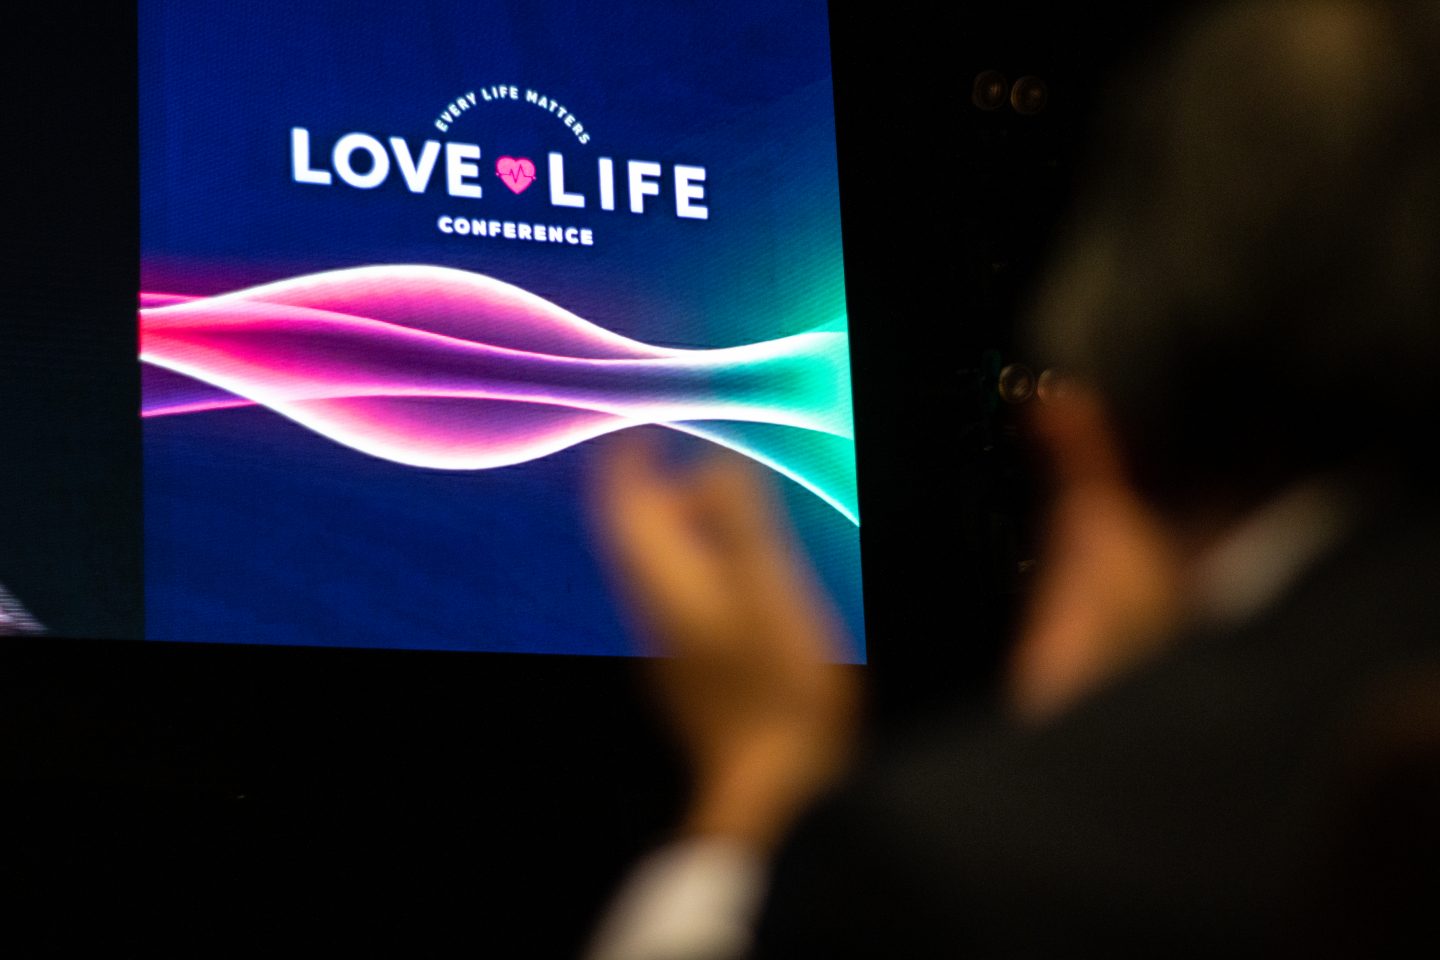 More than 500 people attended the Love Life Conference held at Cornerstone Community Church on February 16, 2019.